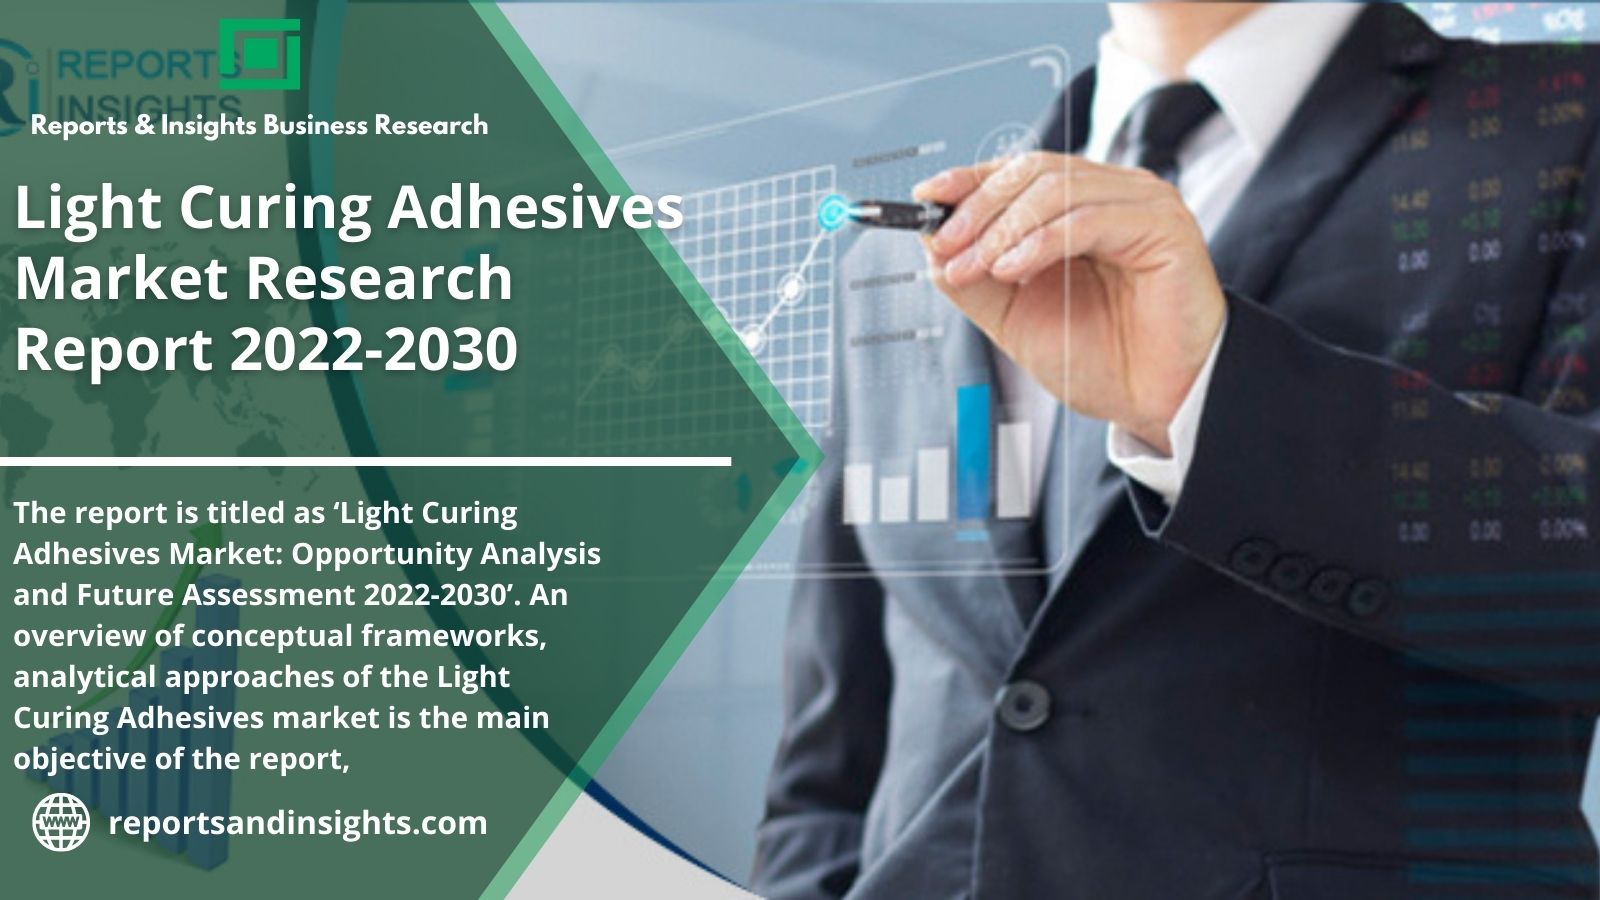 Light Curing Adhesives Market (1)-2b02a01a